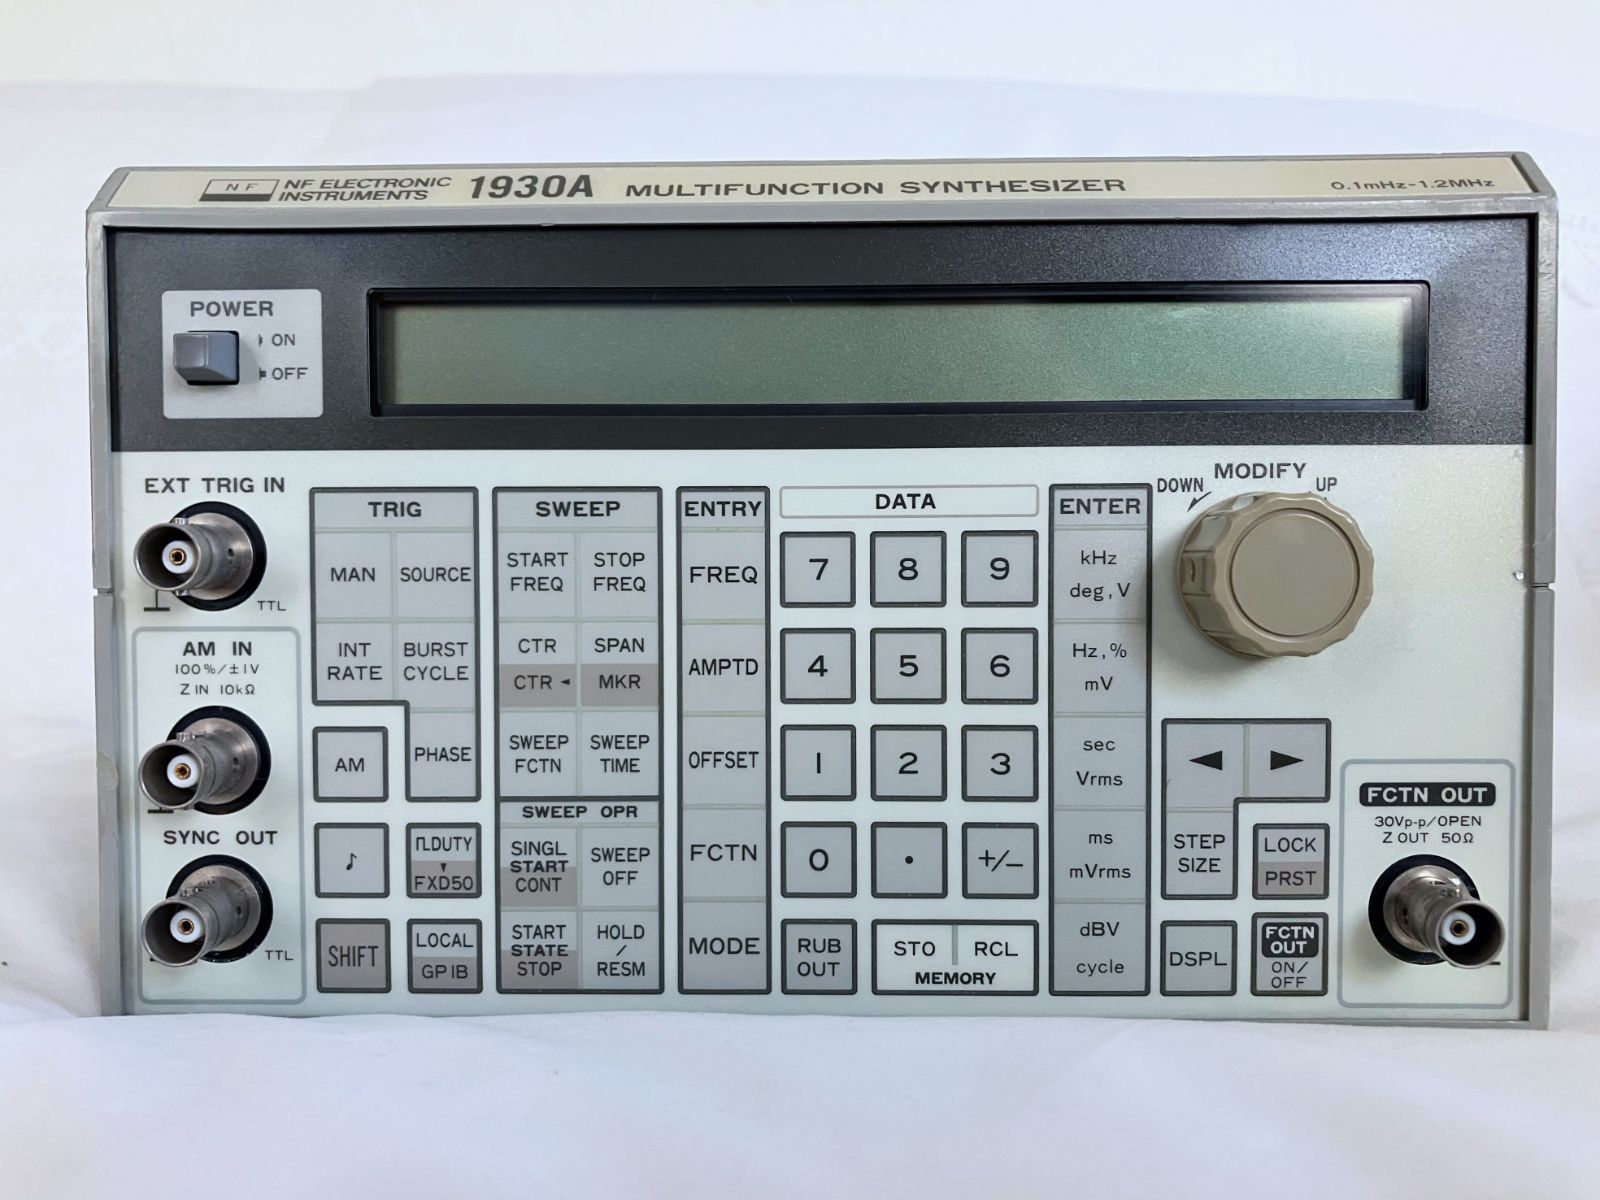 NF 1930A Multi Function Synthesizer 0.1mH~1.2MHz - Analog Circuit